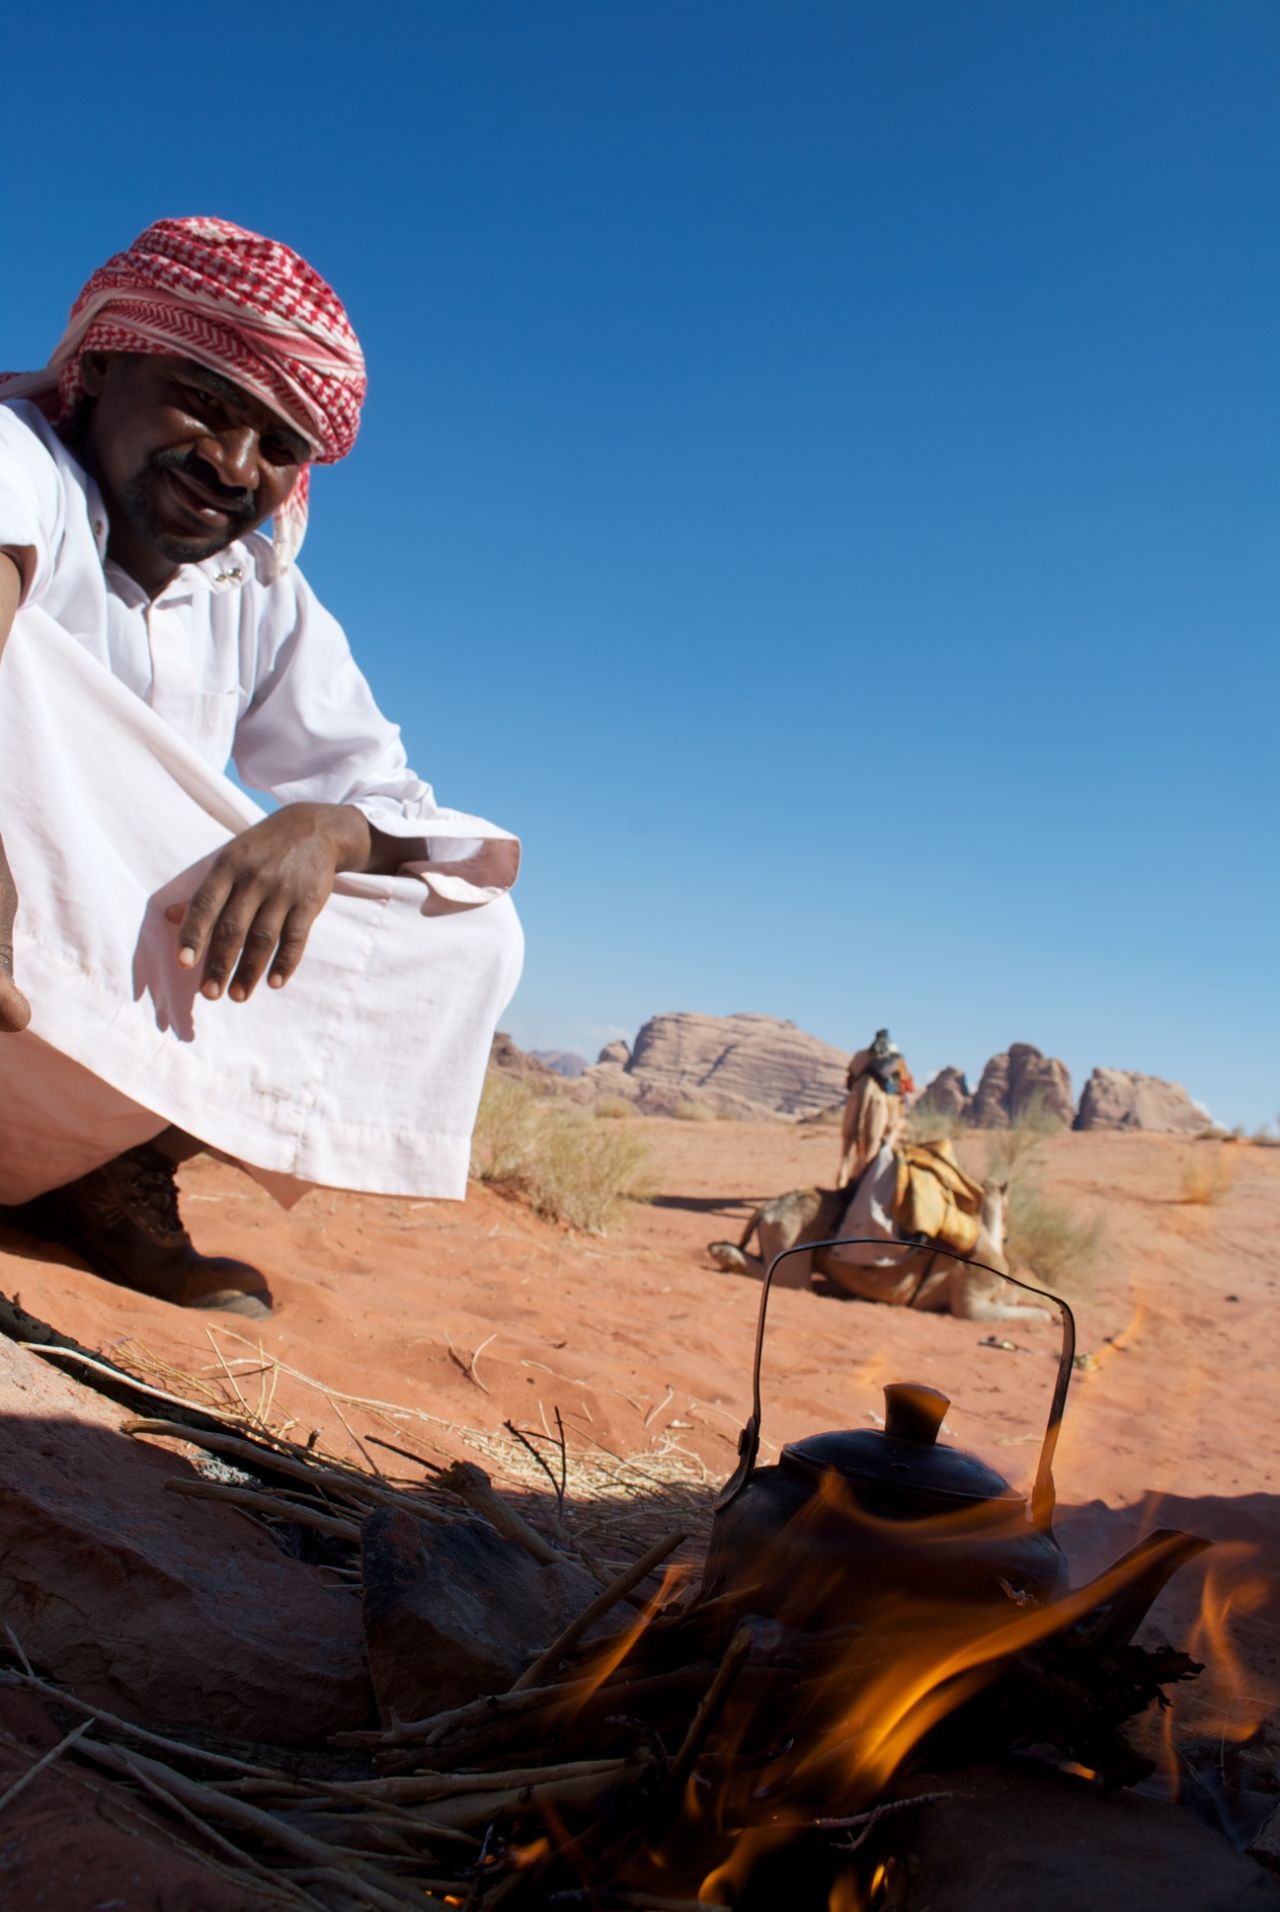 Most camps offer tent or under-the-stars accommodation, and meals cooked in the Bedouin style.